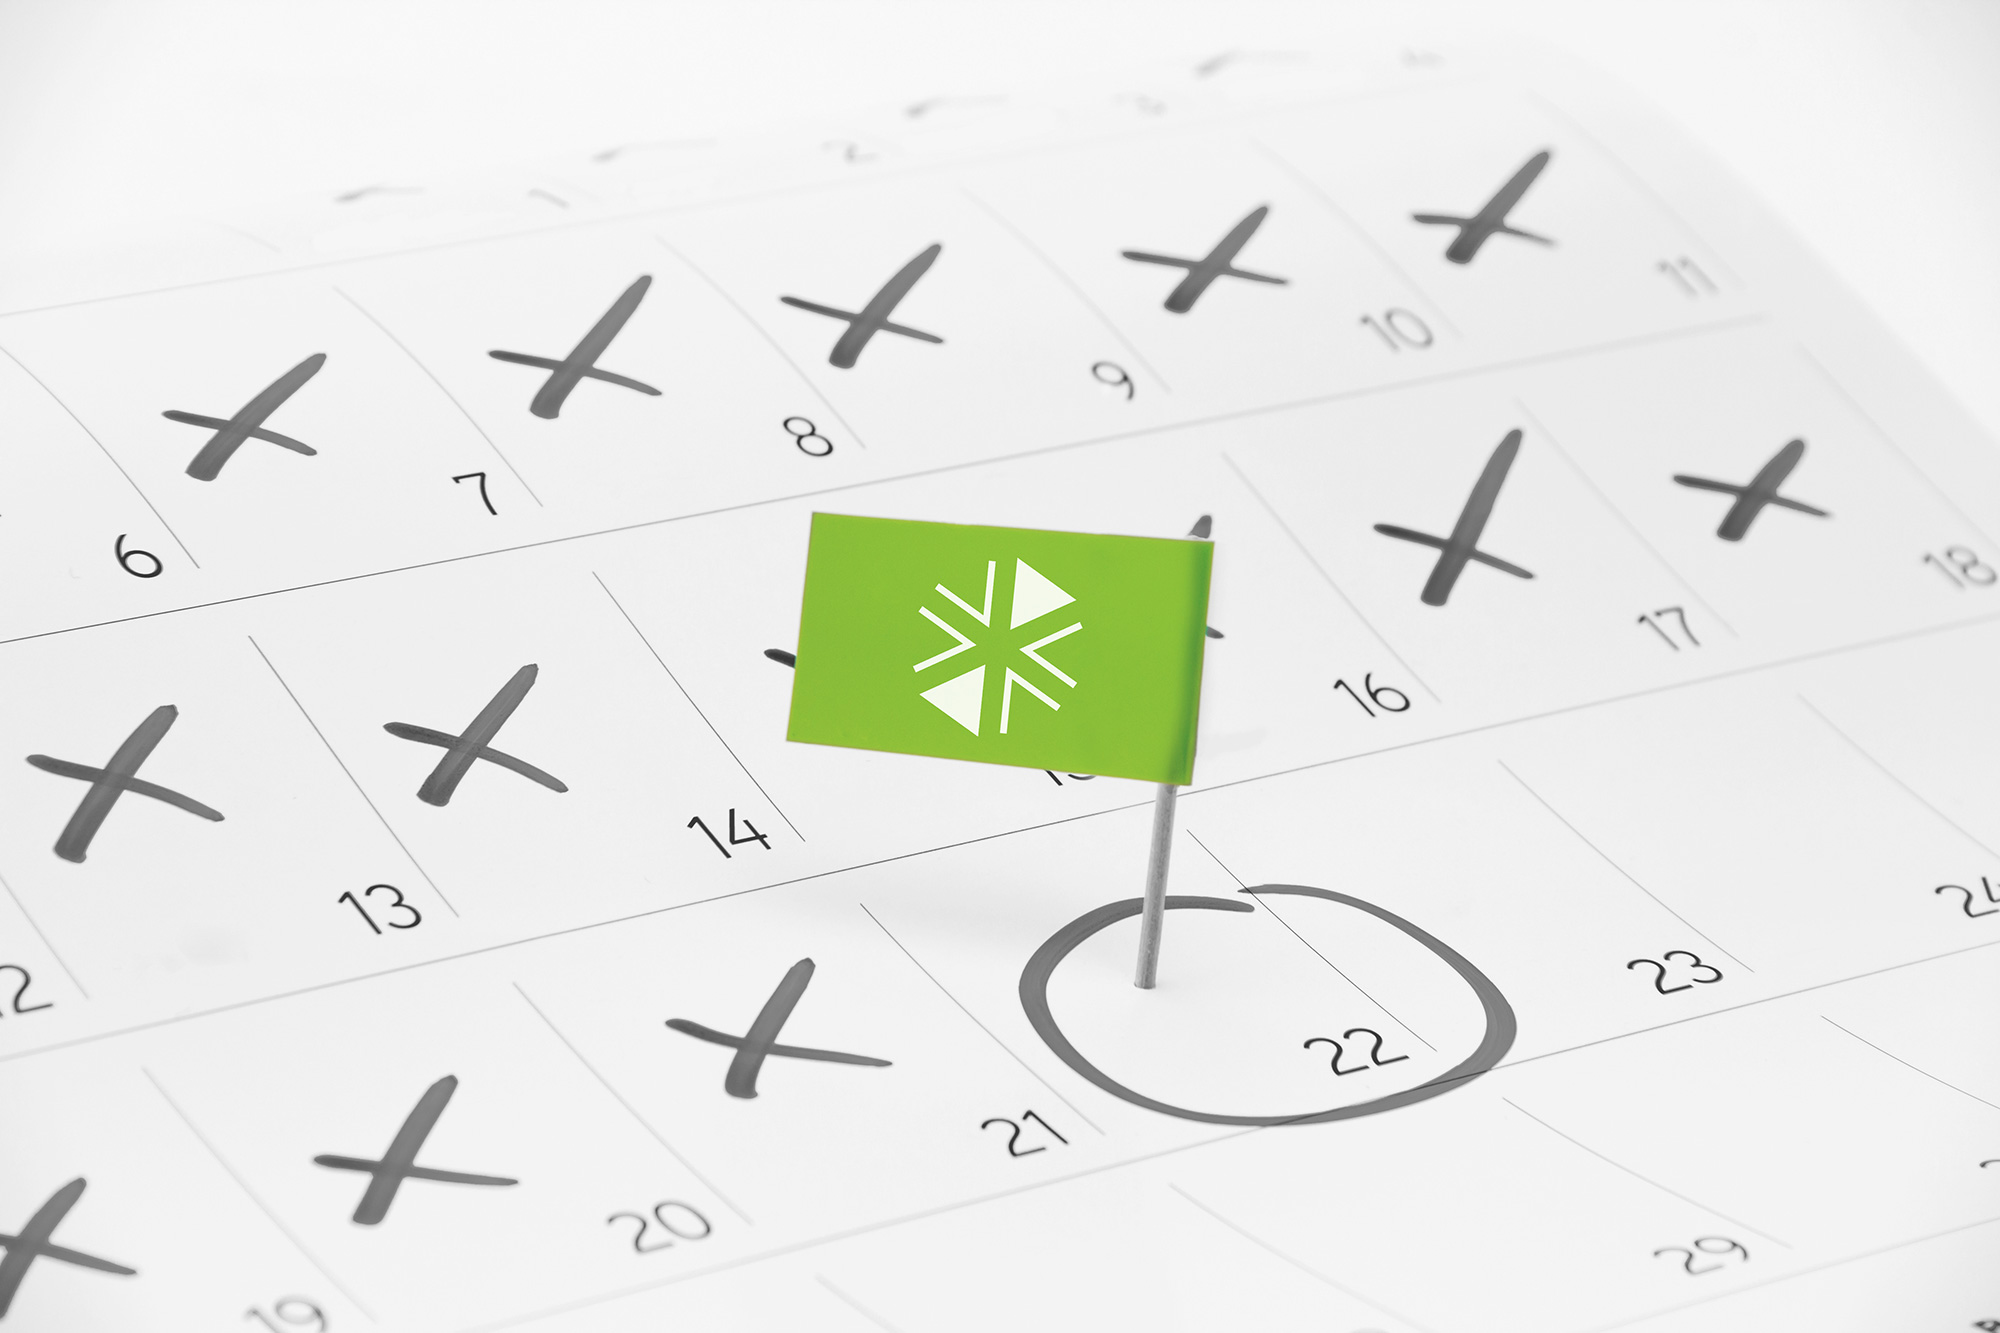 Close-up of a calendar with a day circled and pinned with a green flag.